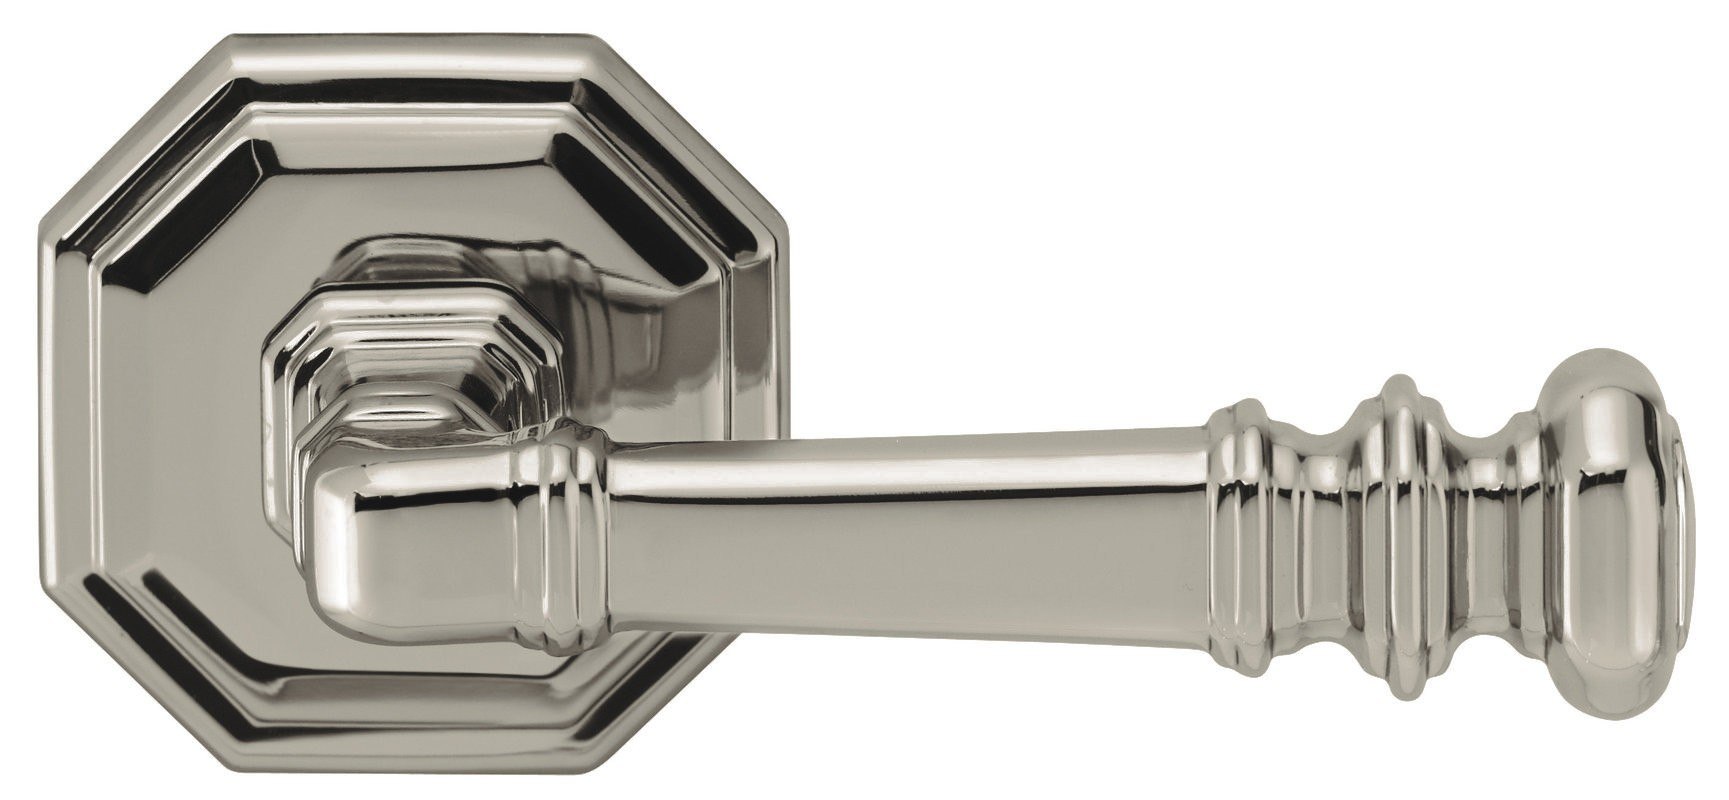 OMNIA 101/00.PA SOLID BRASS INTERIOR TRADITIONAL LEVER LATCHSET WITH 2-5/8 INCH DIAMETER OCTAGONAL ROSE PASSAGE ENTRY